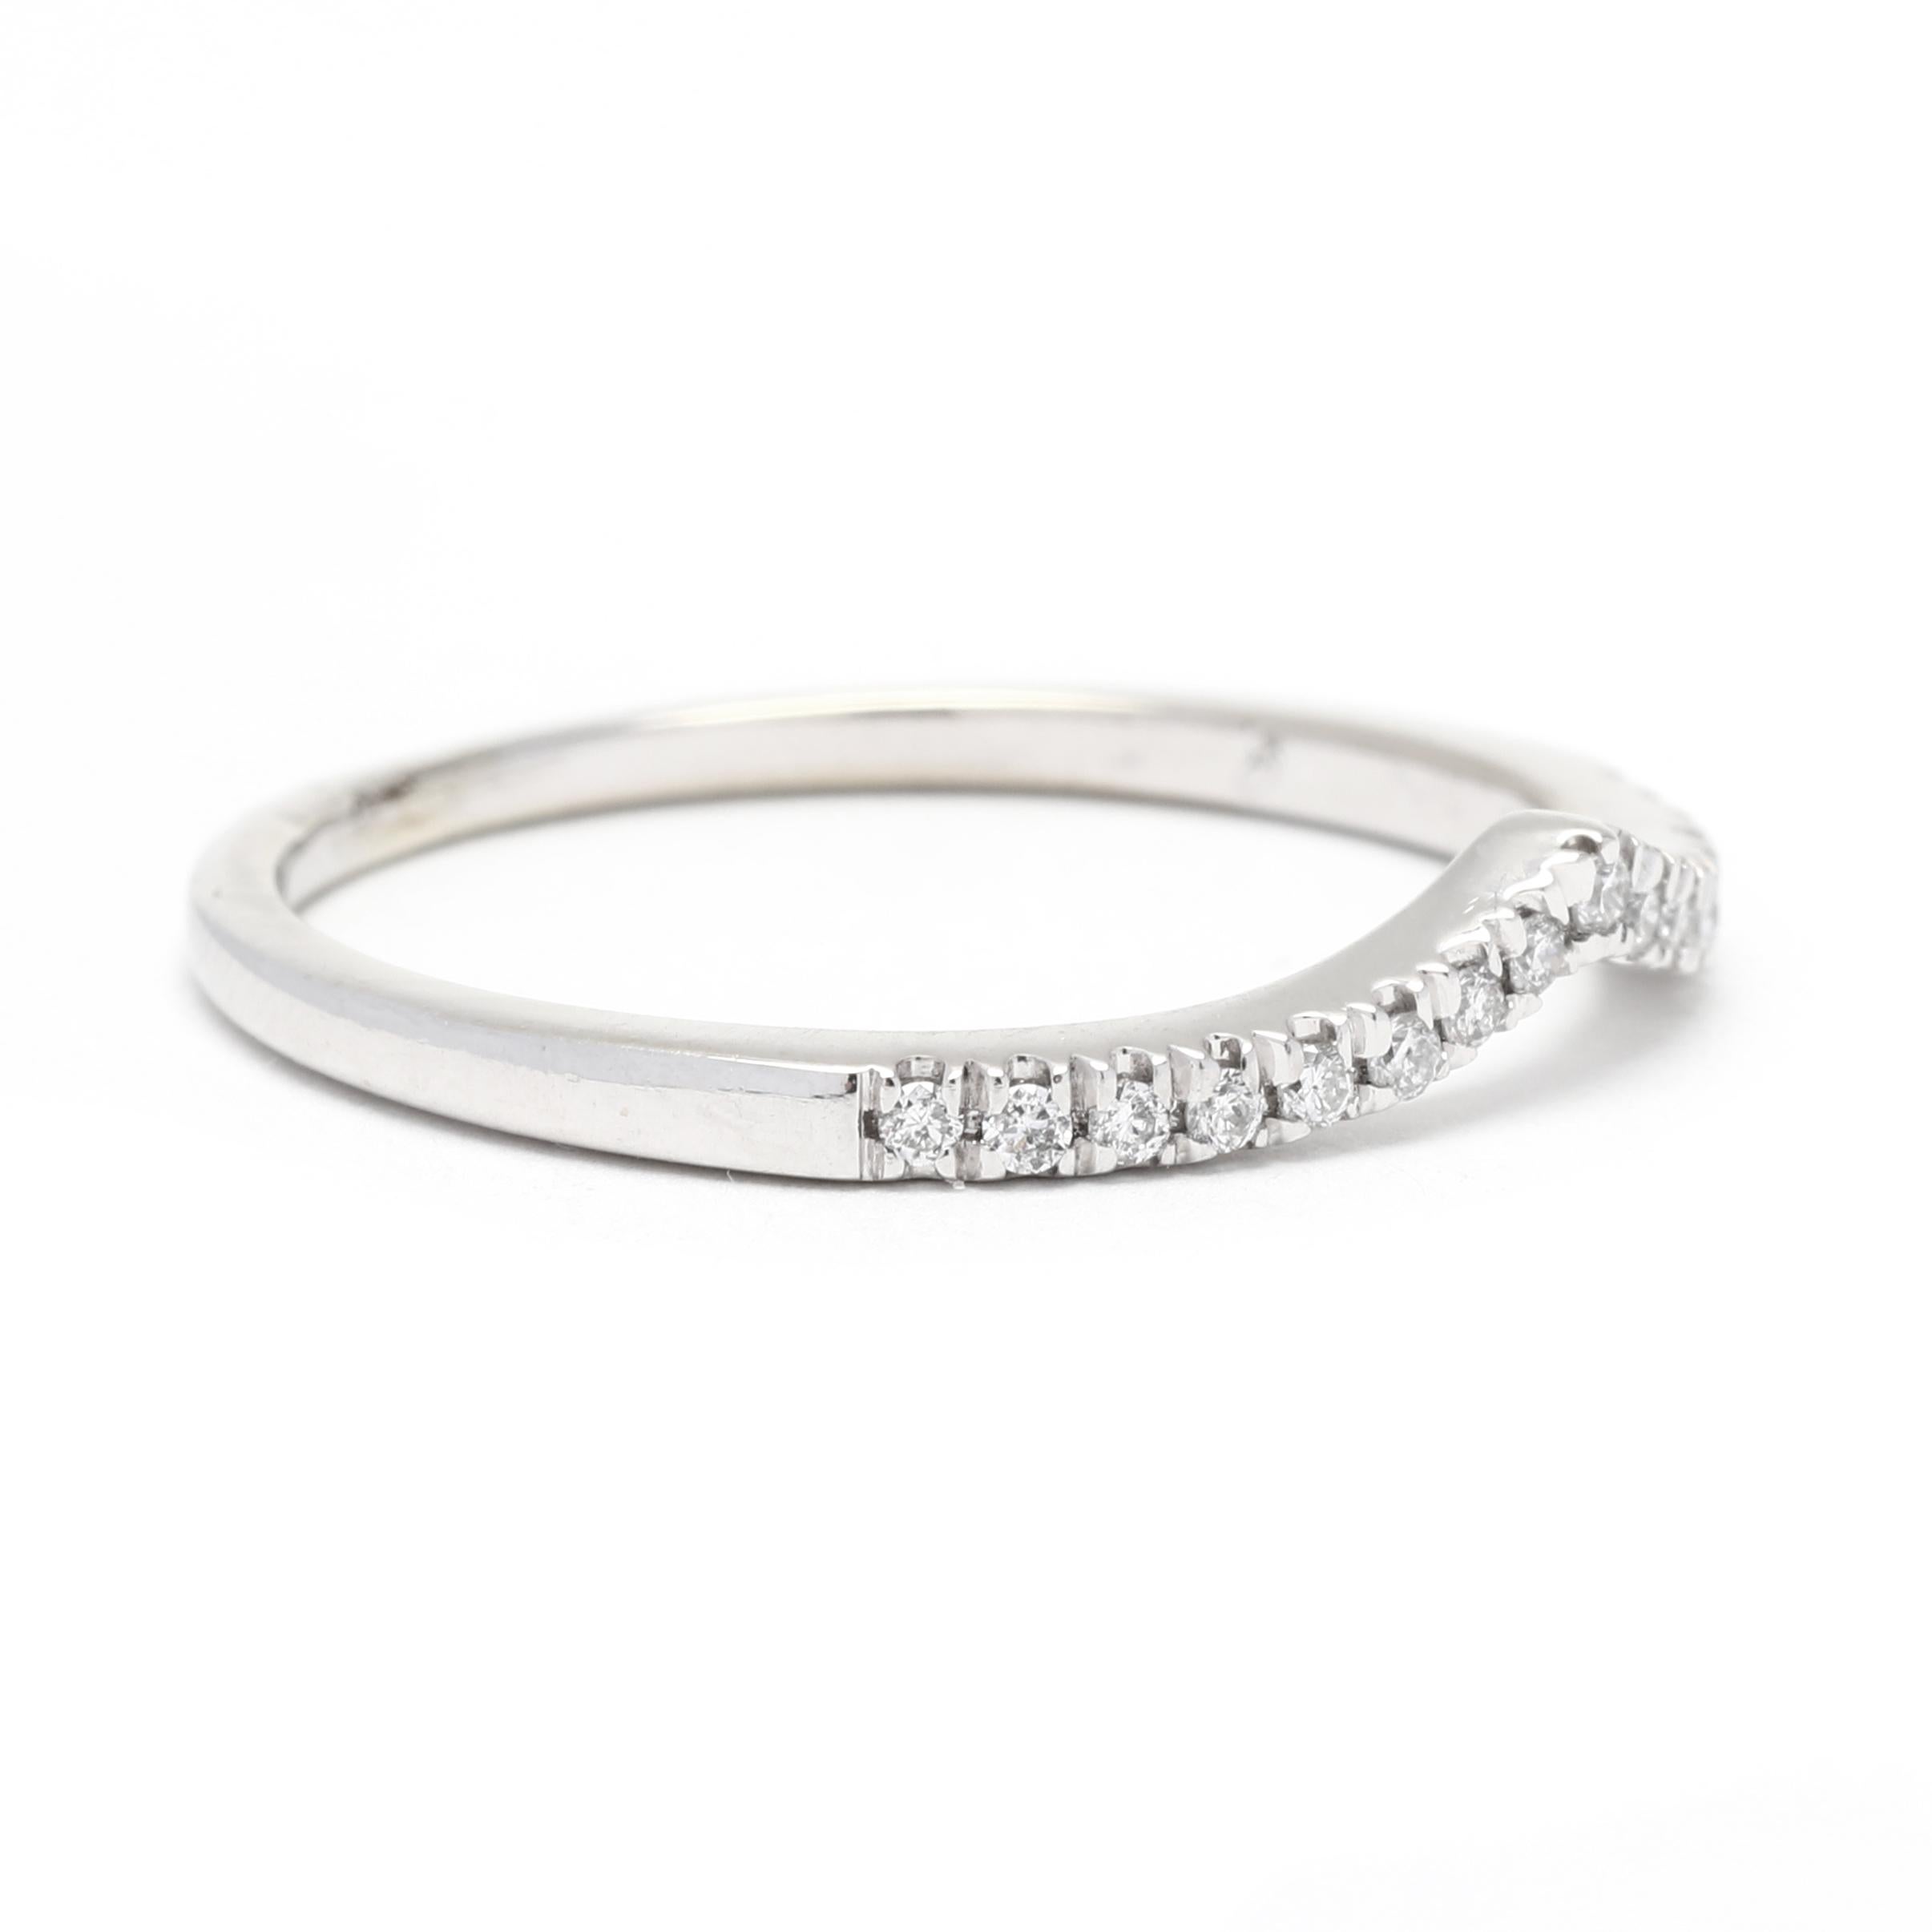 This 0.18ctw curved diamond wedding band is a stunning, timeless piece crafted from 10K white gold. A simple, yet elegant design, this V-shaped band is set with 0.18ctw of round diamonds, adding the perfect touch of sparkle and shine. This ring is